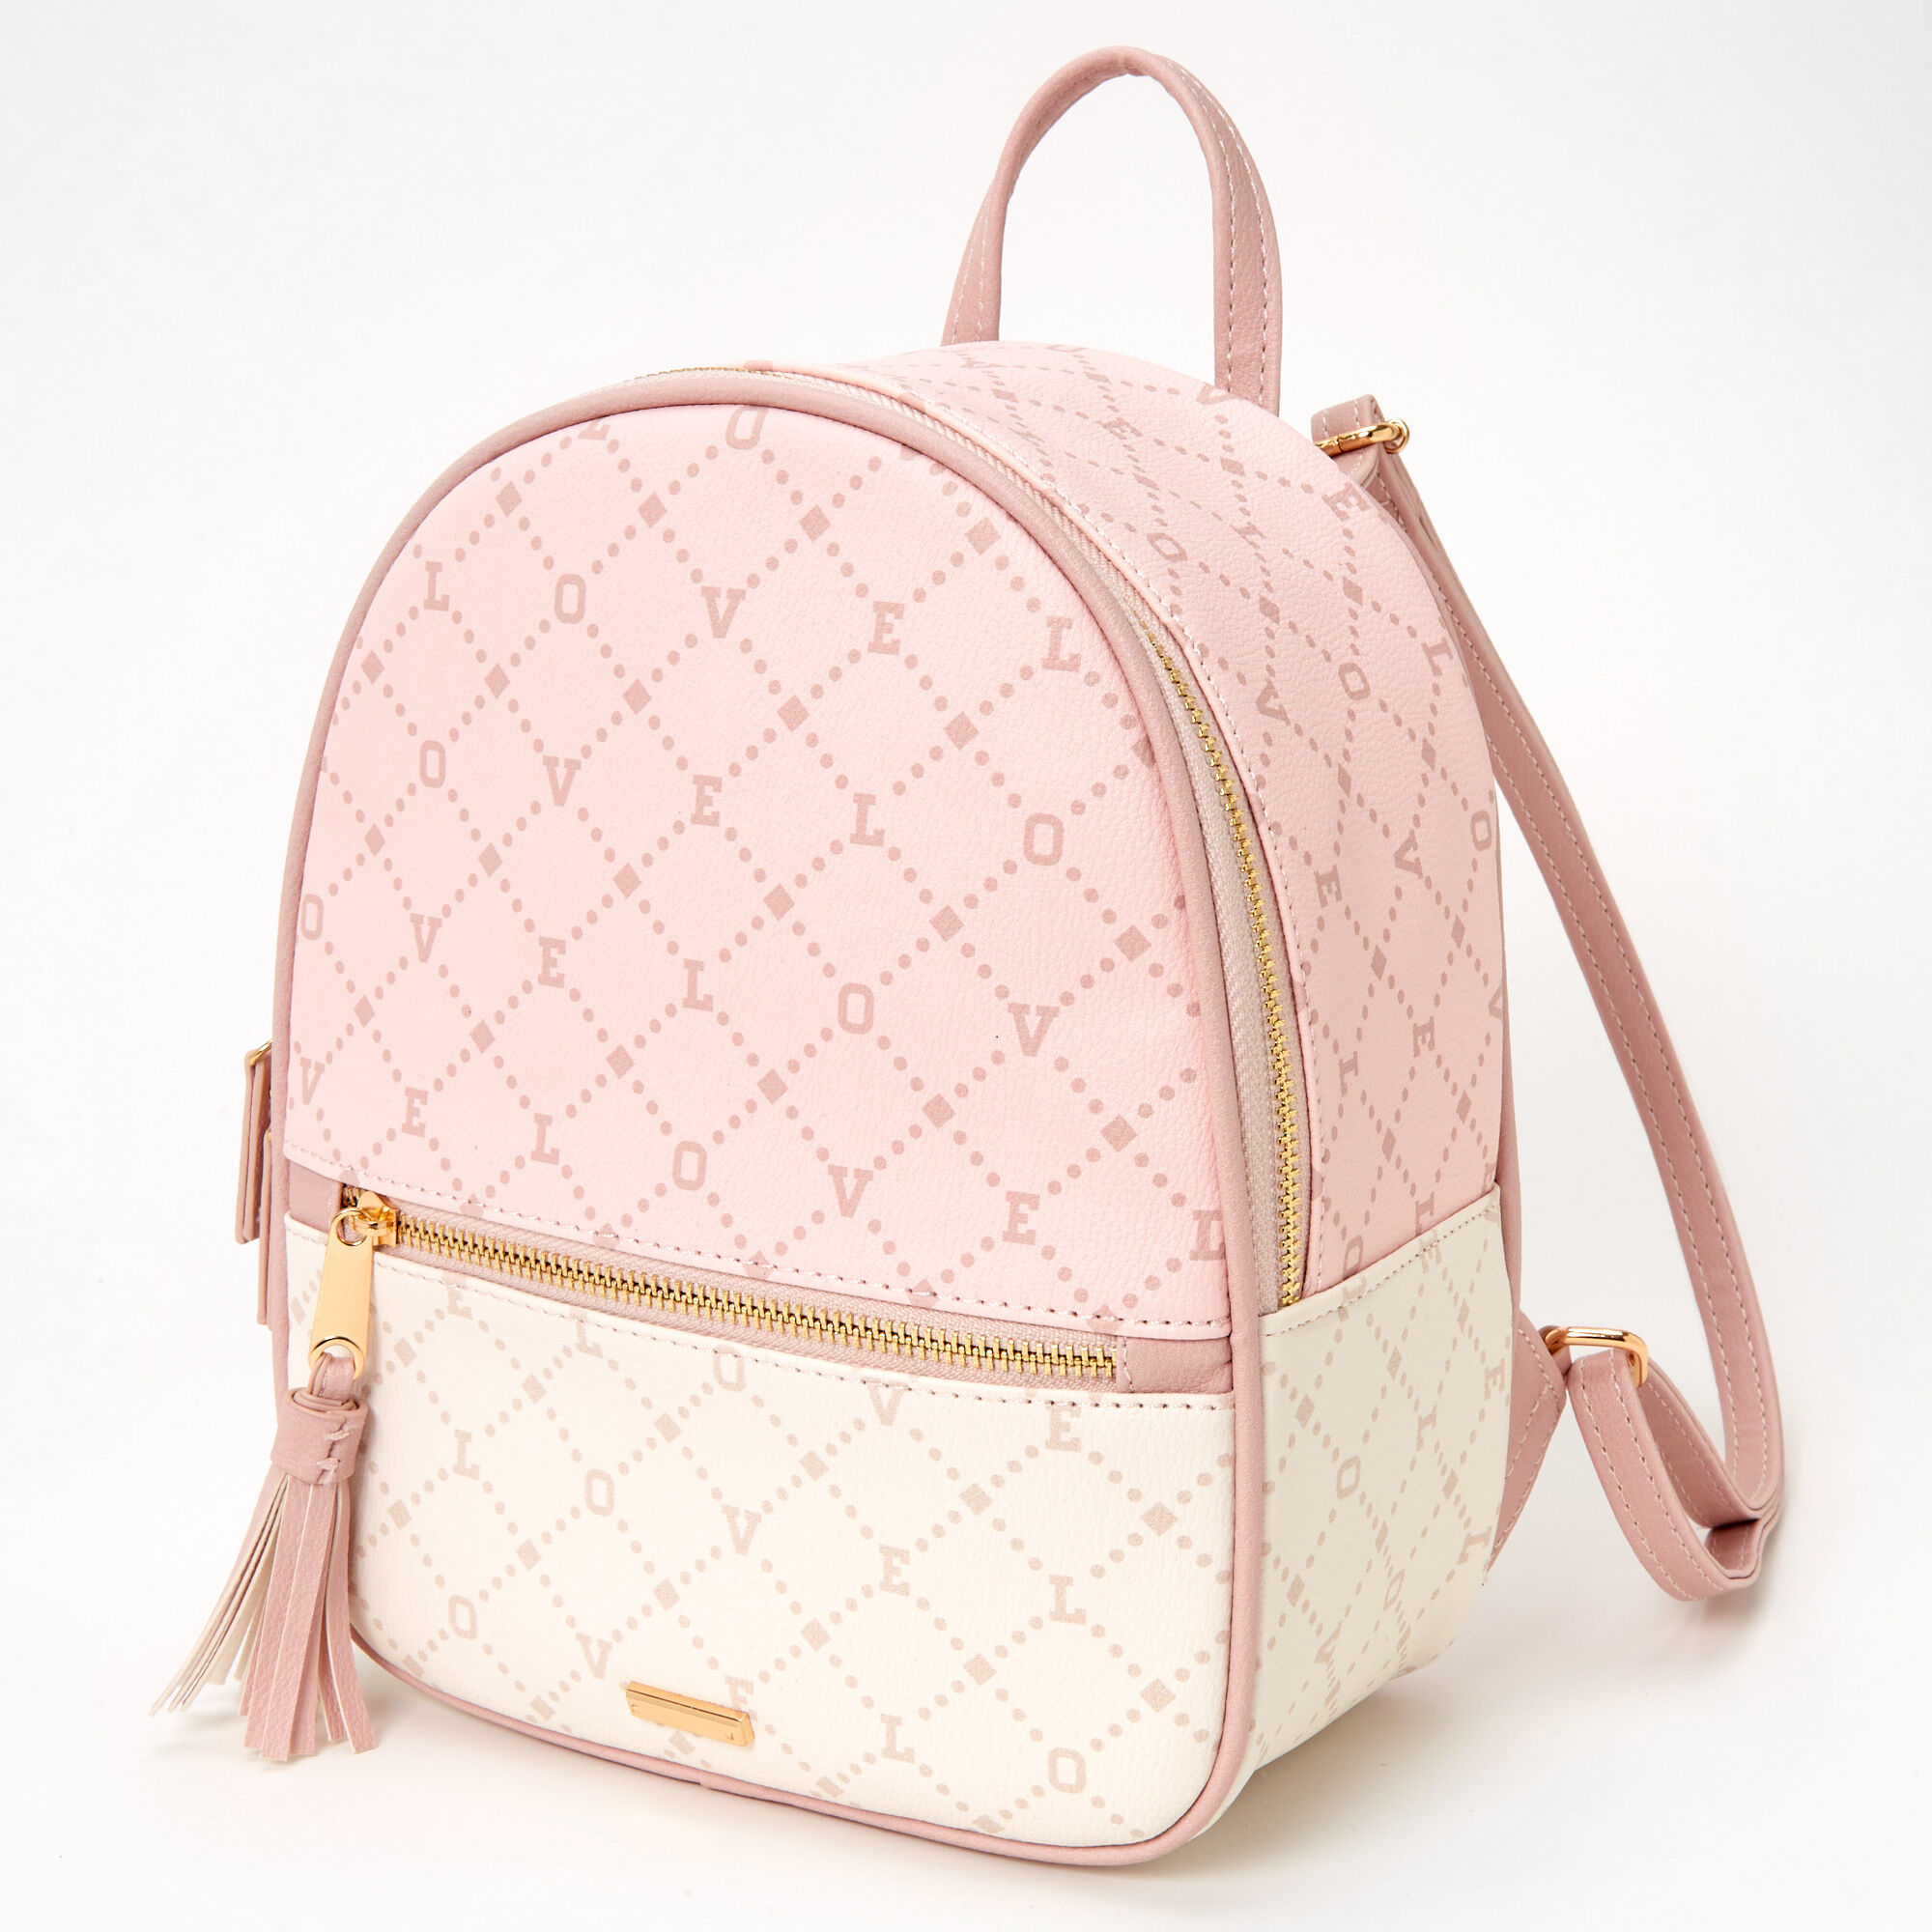 Pink Colorblock Status Small Backpack